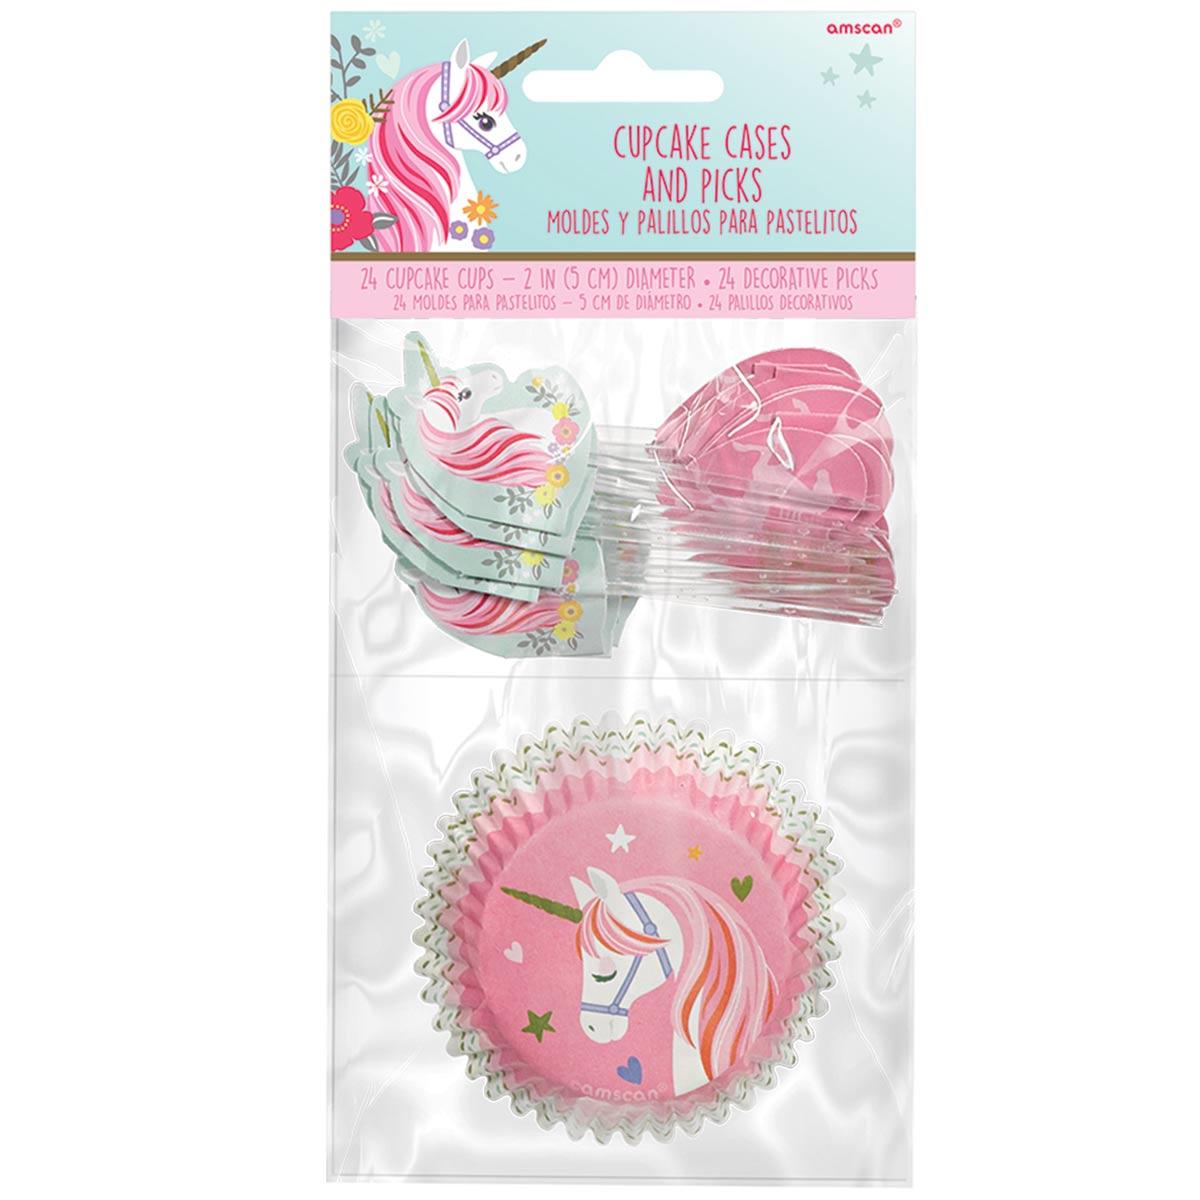 Magical Unicorn Cake Cases & Picks 48pcs total, 24 of each by Amscan 141929 available here at Karnival Costumes online party shop